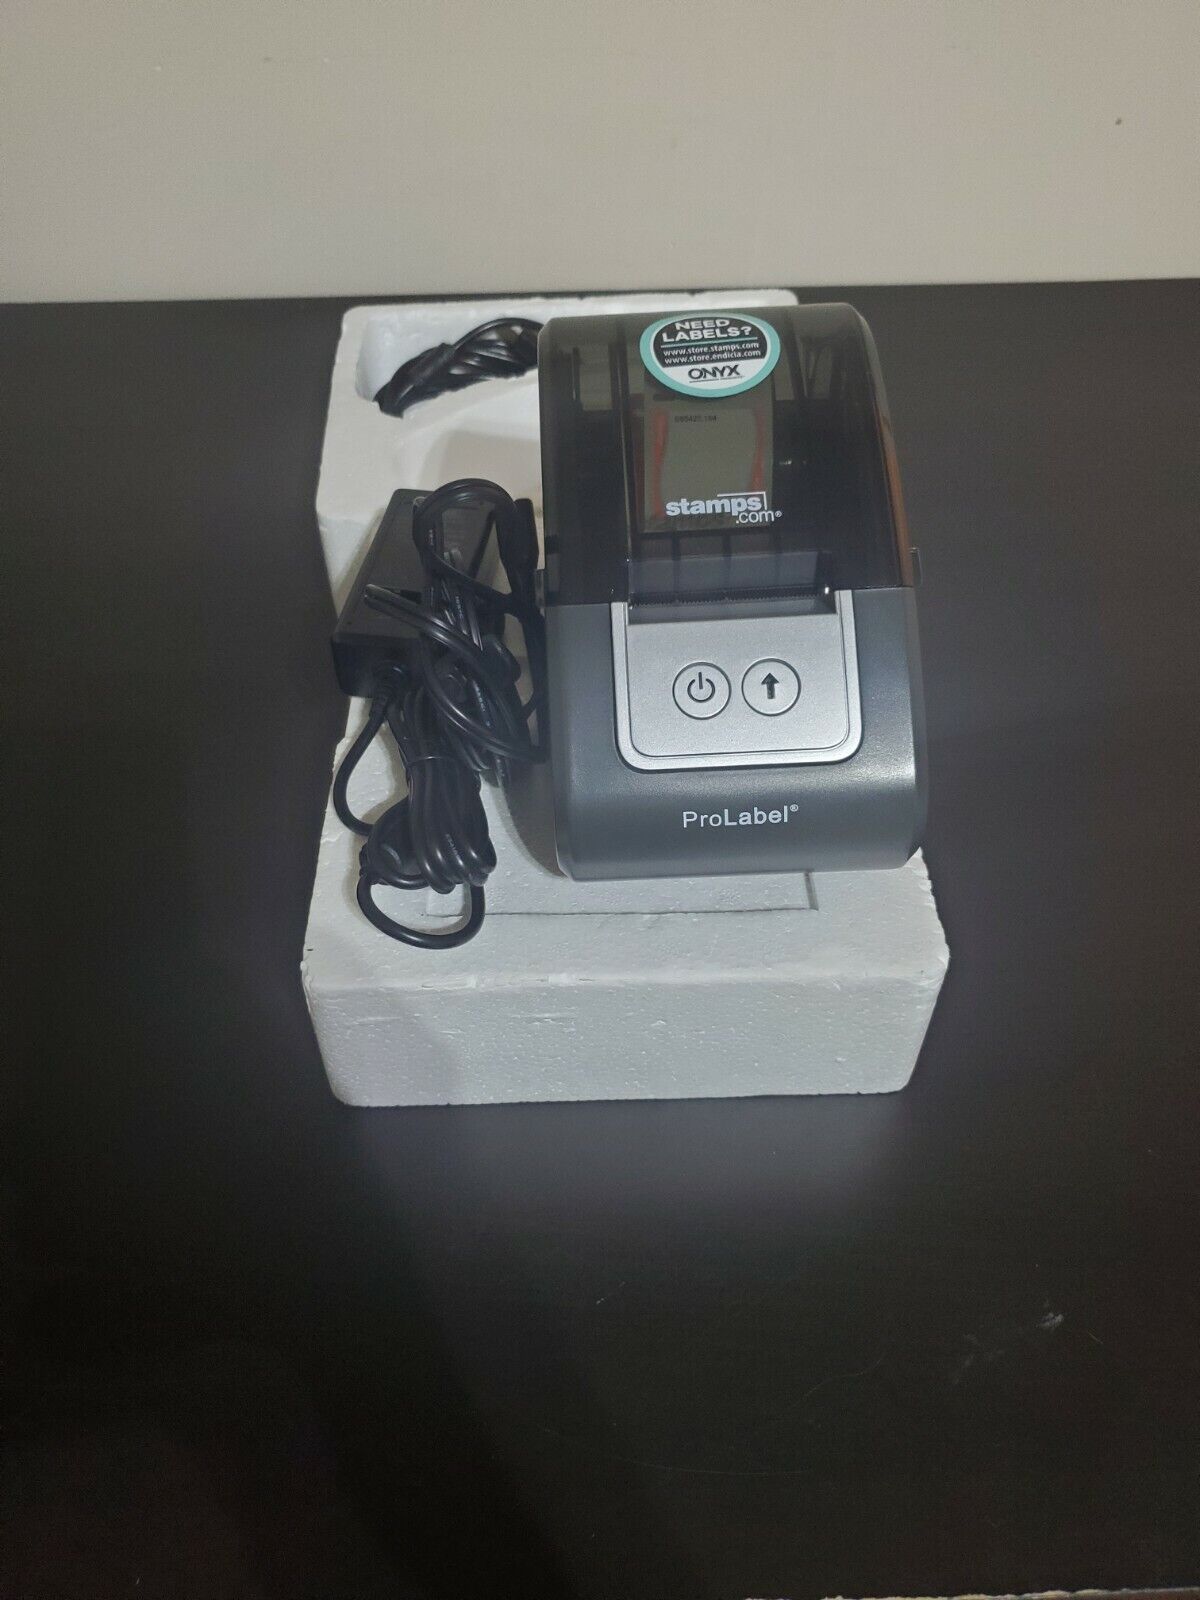 Stamps.com Pro Label Printer P2 Printer With Power, USB cable Model#ORBSDCP2PRN